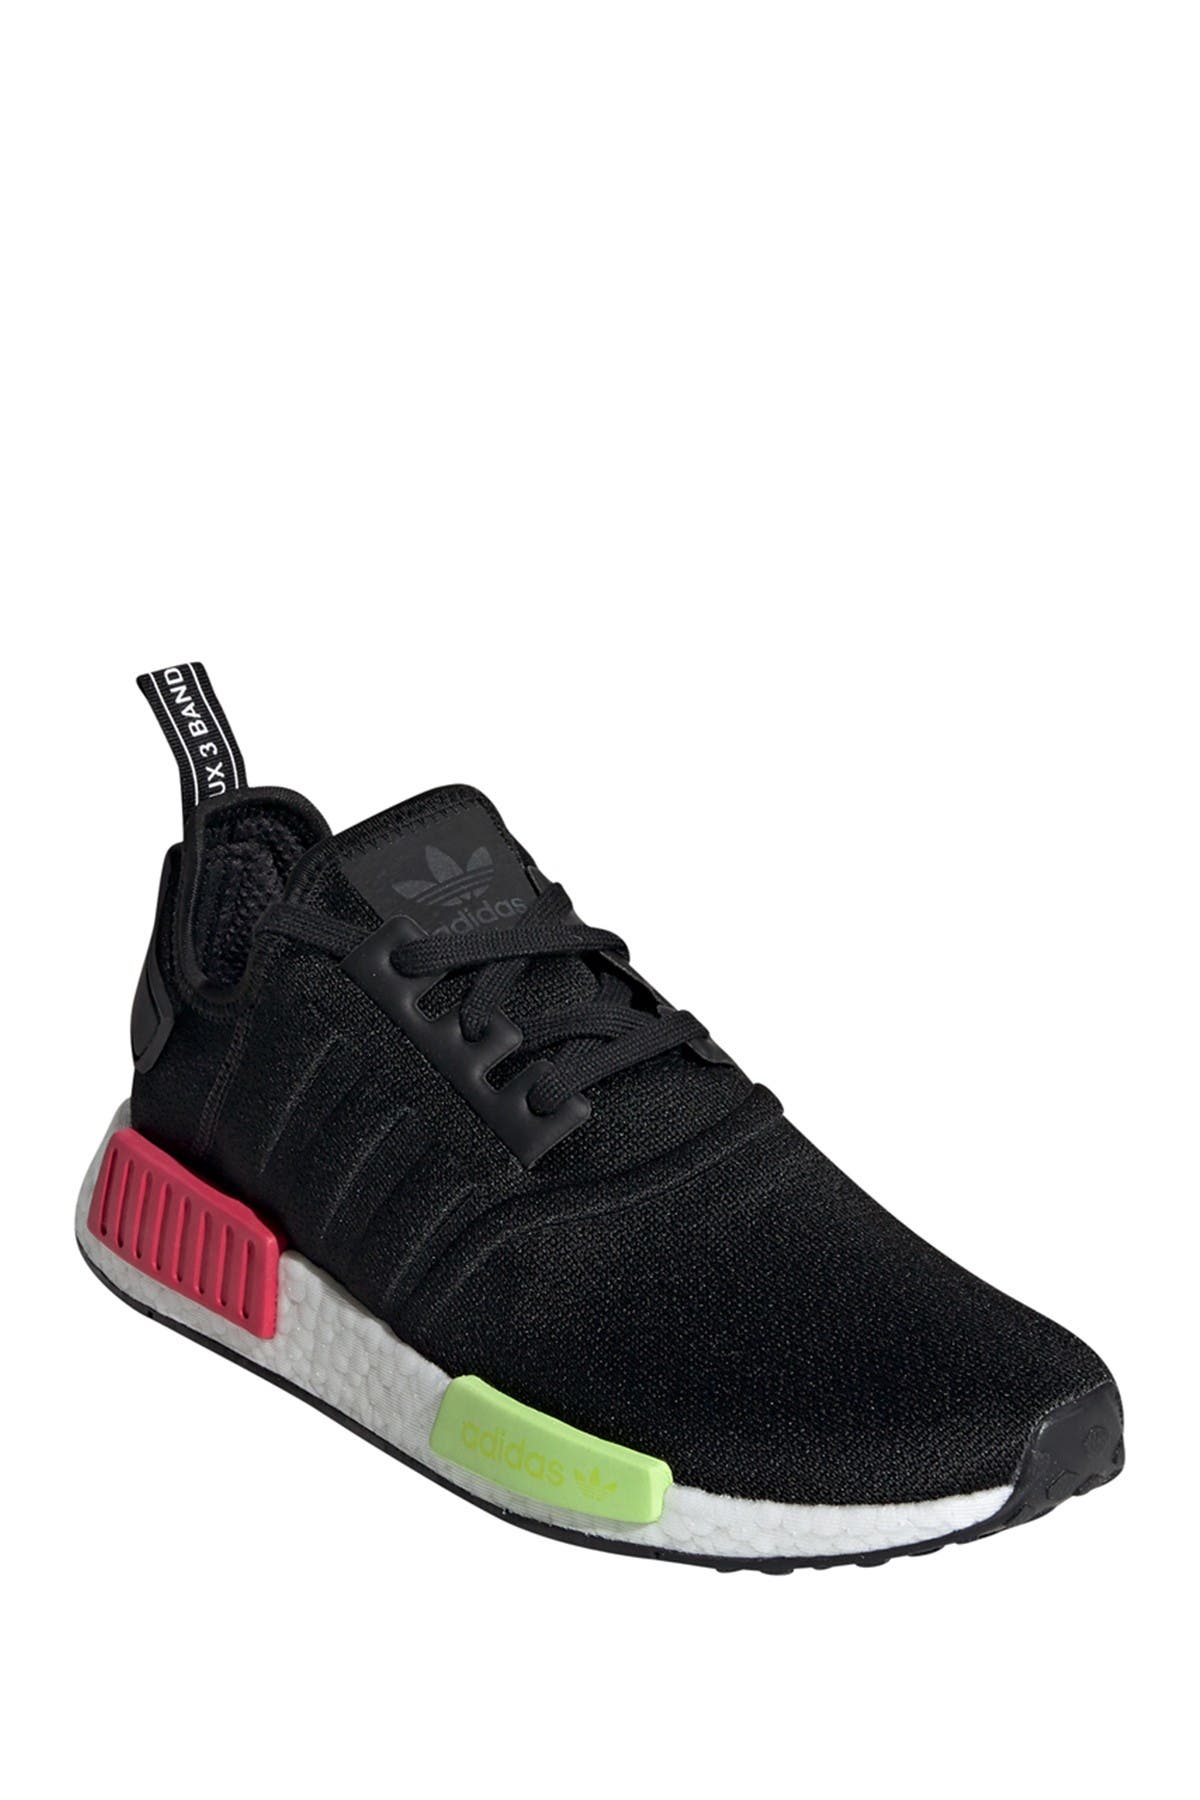 ugly nmds